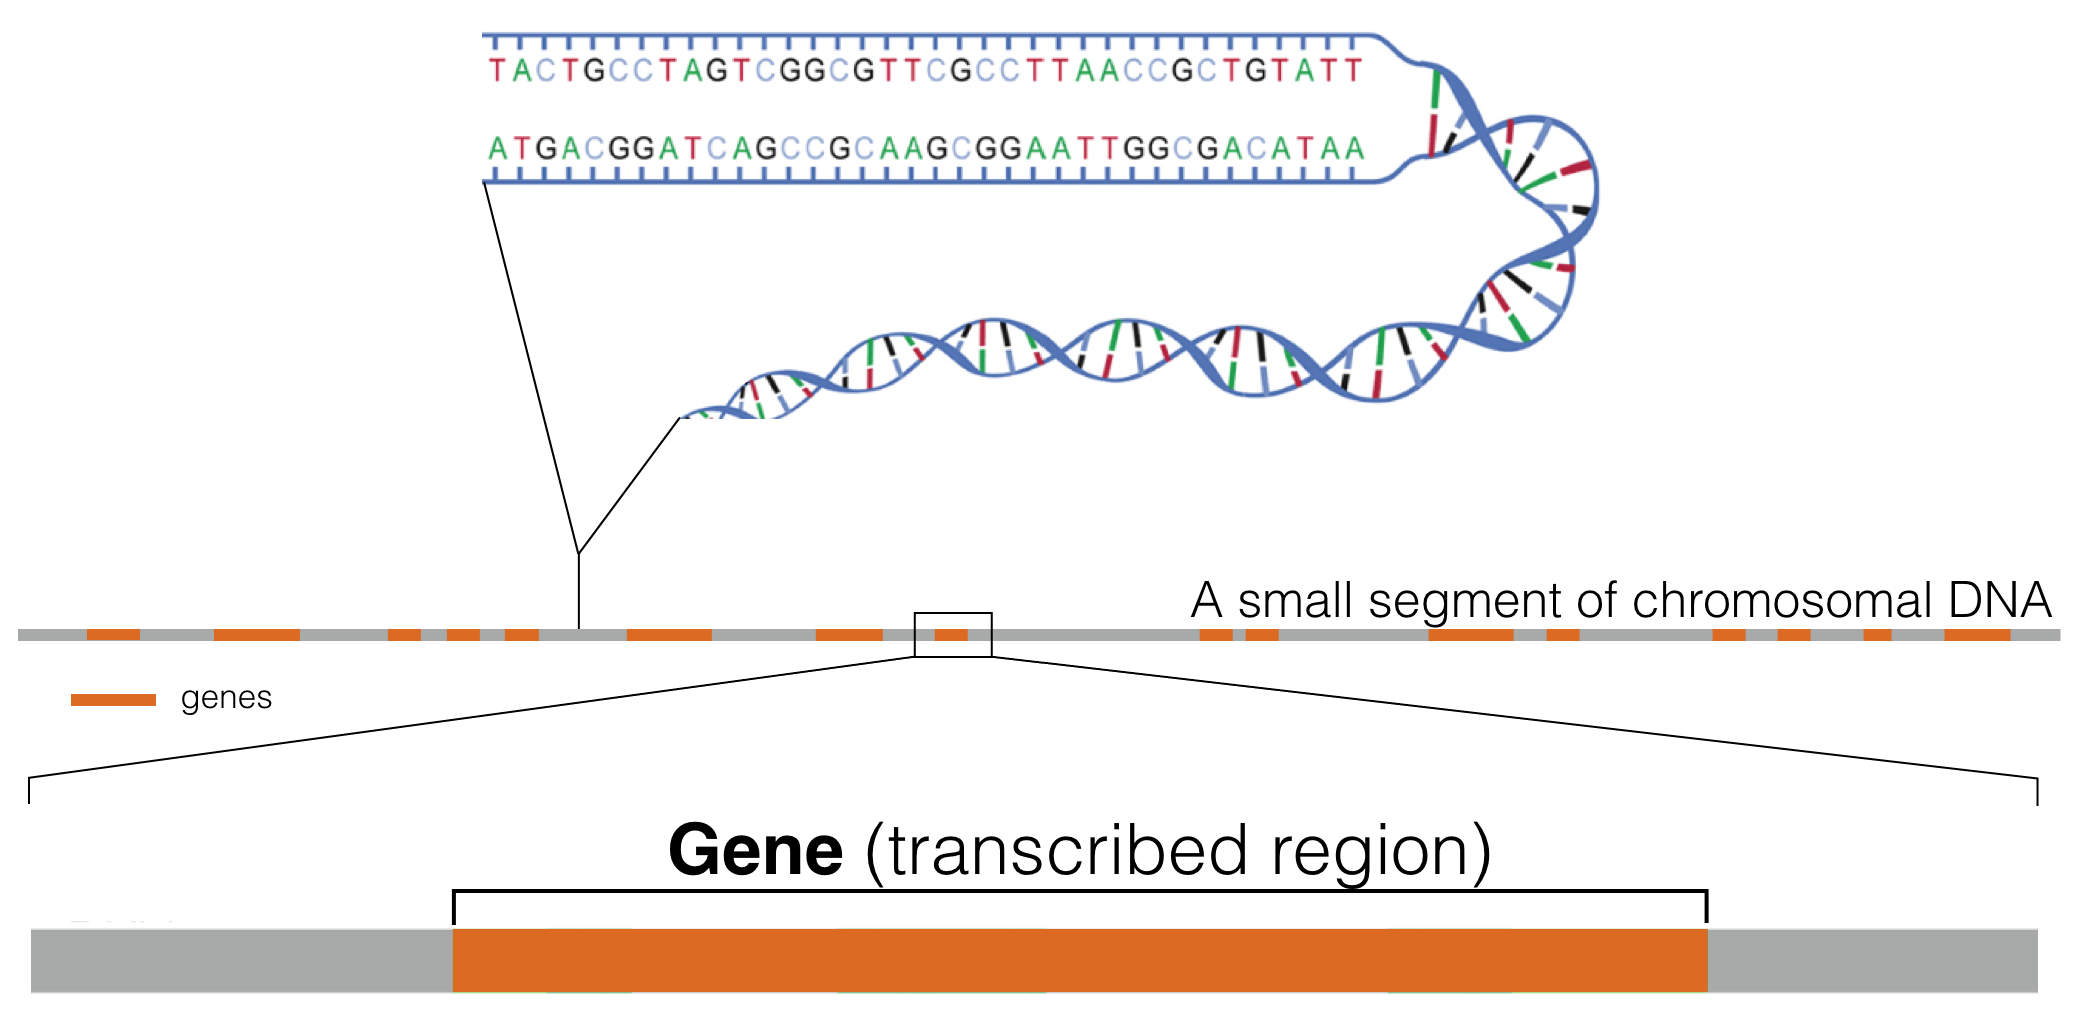 This schematic represents a hypothetical segment of a chromosome with orange rectangles representing genes distributed linearly along the DNA segment shown.